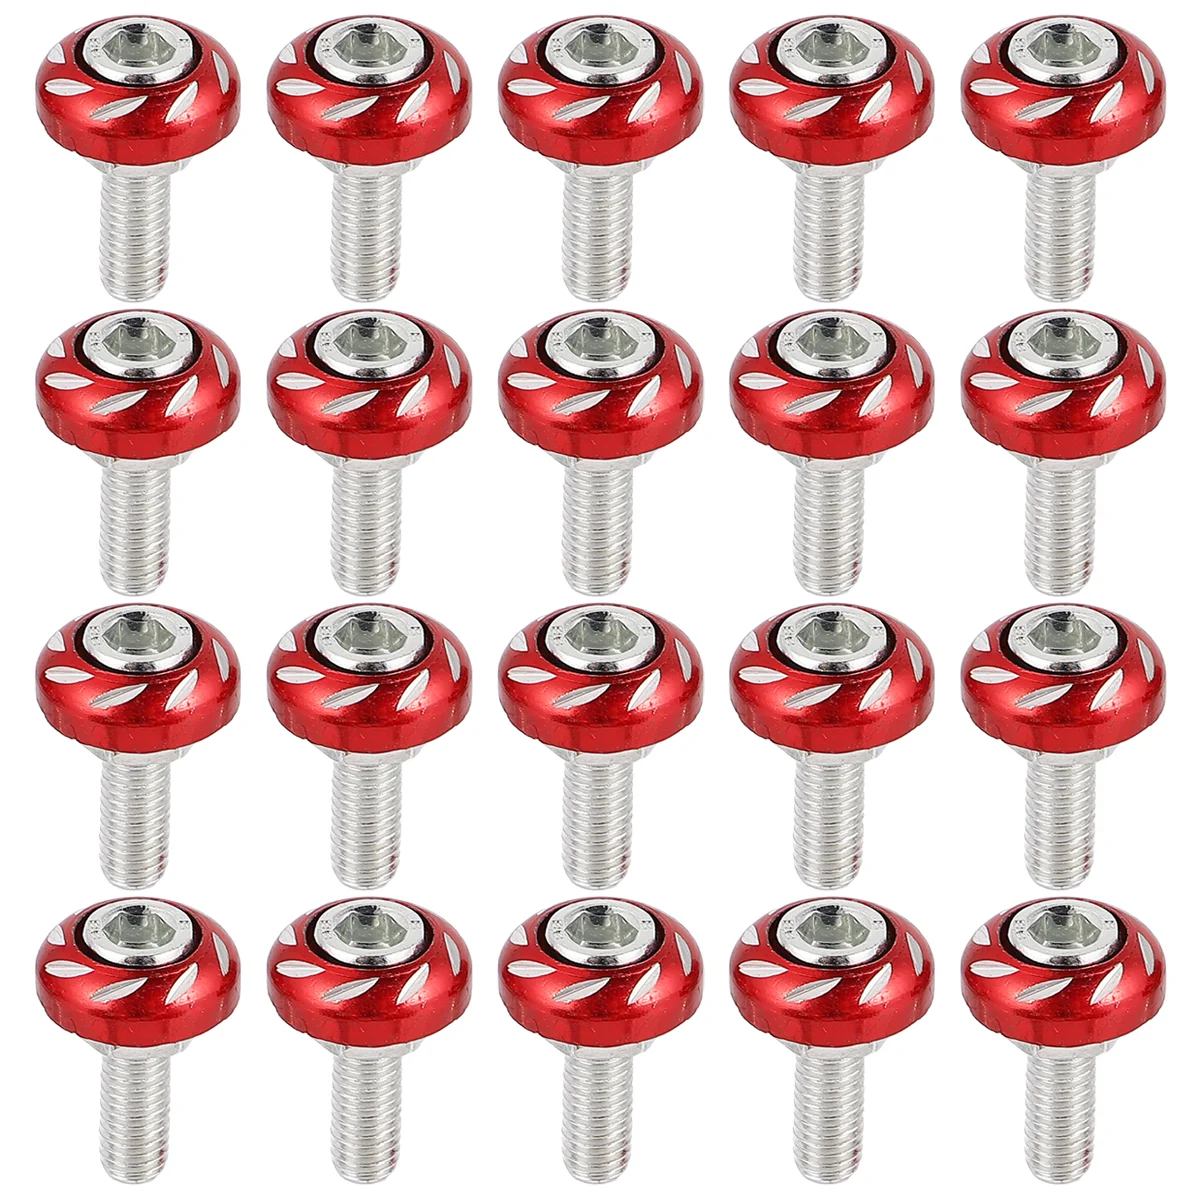 

20 Pcs Motorcycle Electric Vehicle Moped Decorative Screws Carving Motorbike License Plate Refit Aluminum Alloy Modified Parts